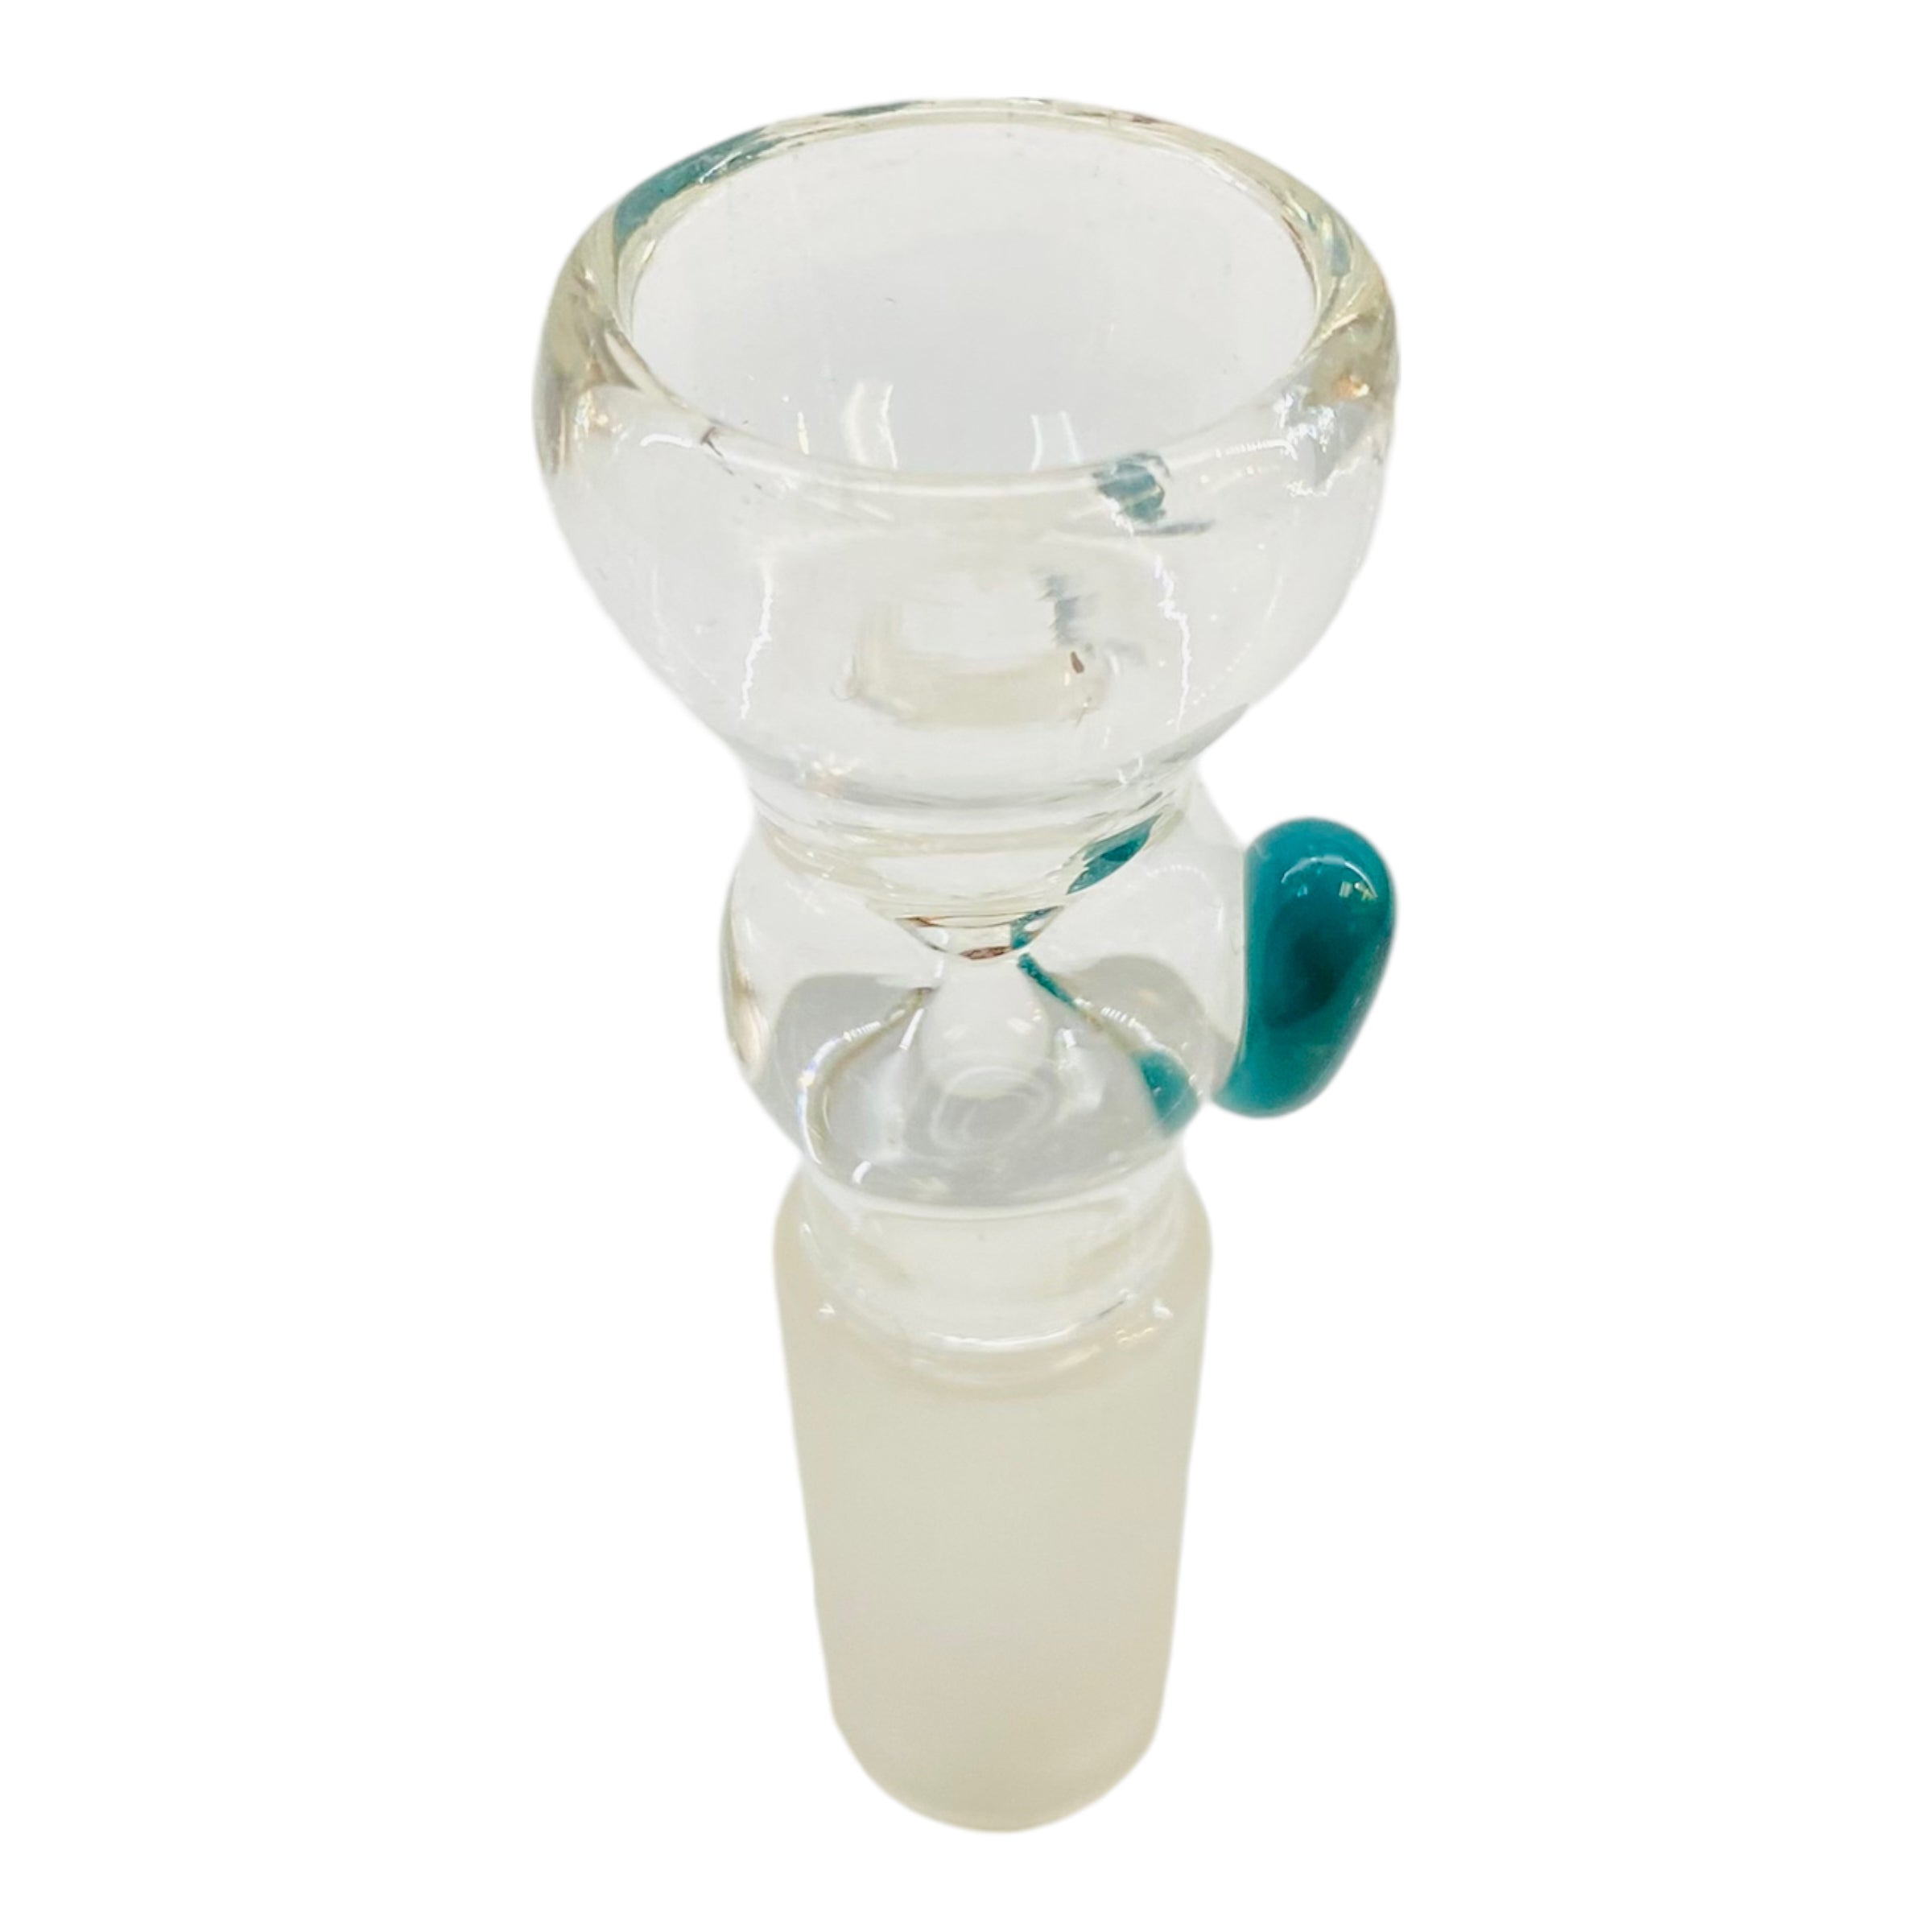 14mm Flower Bowl - Clear Martini Shape Funnel Bong Bowl Piece With Color Dot - Teal